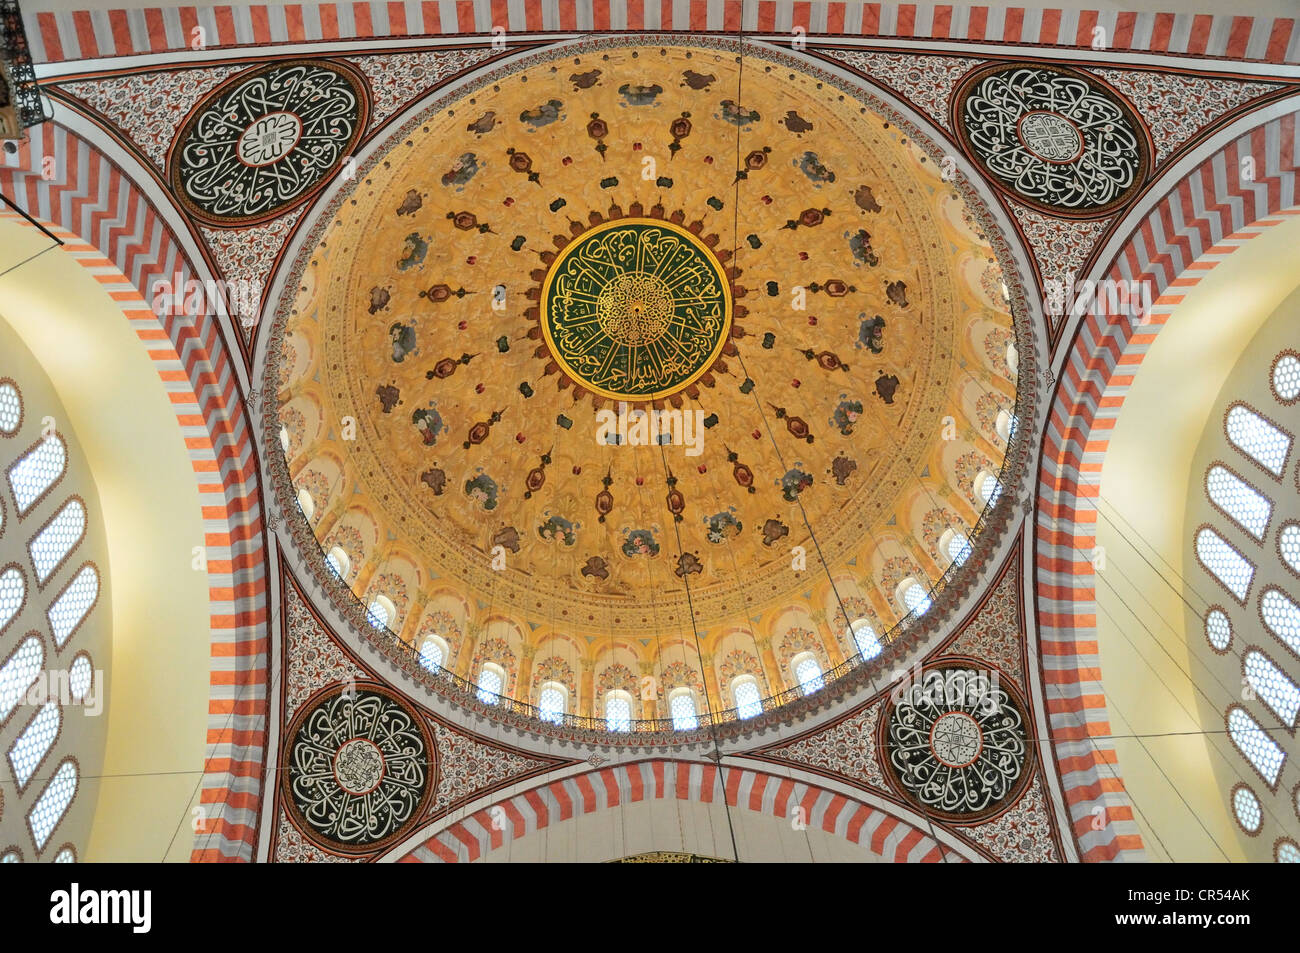 Ceiling dome of the Sultan Suleyman Mosque, Istanbul, Turkey, Europe Stock Photo